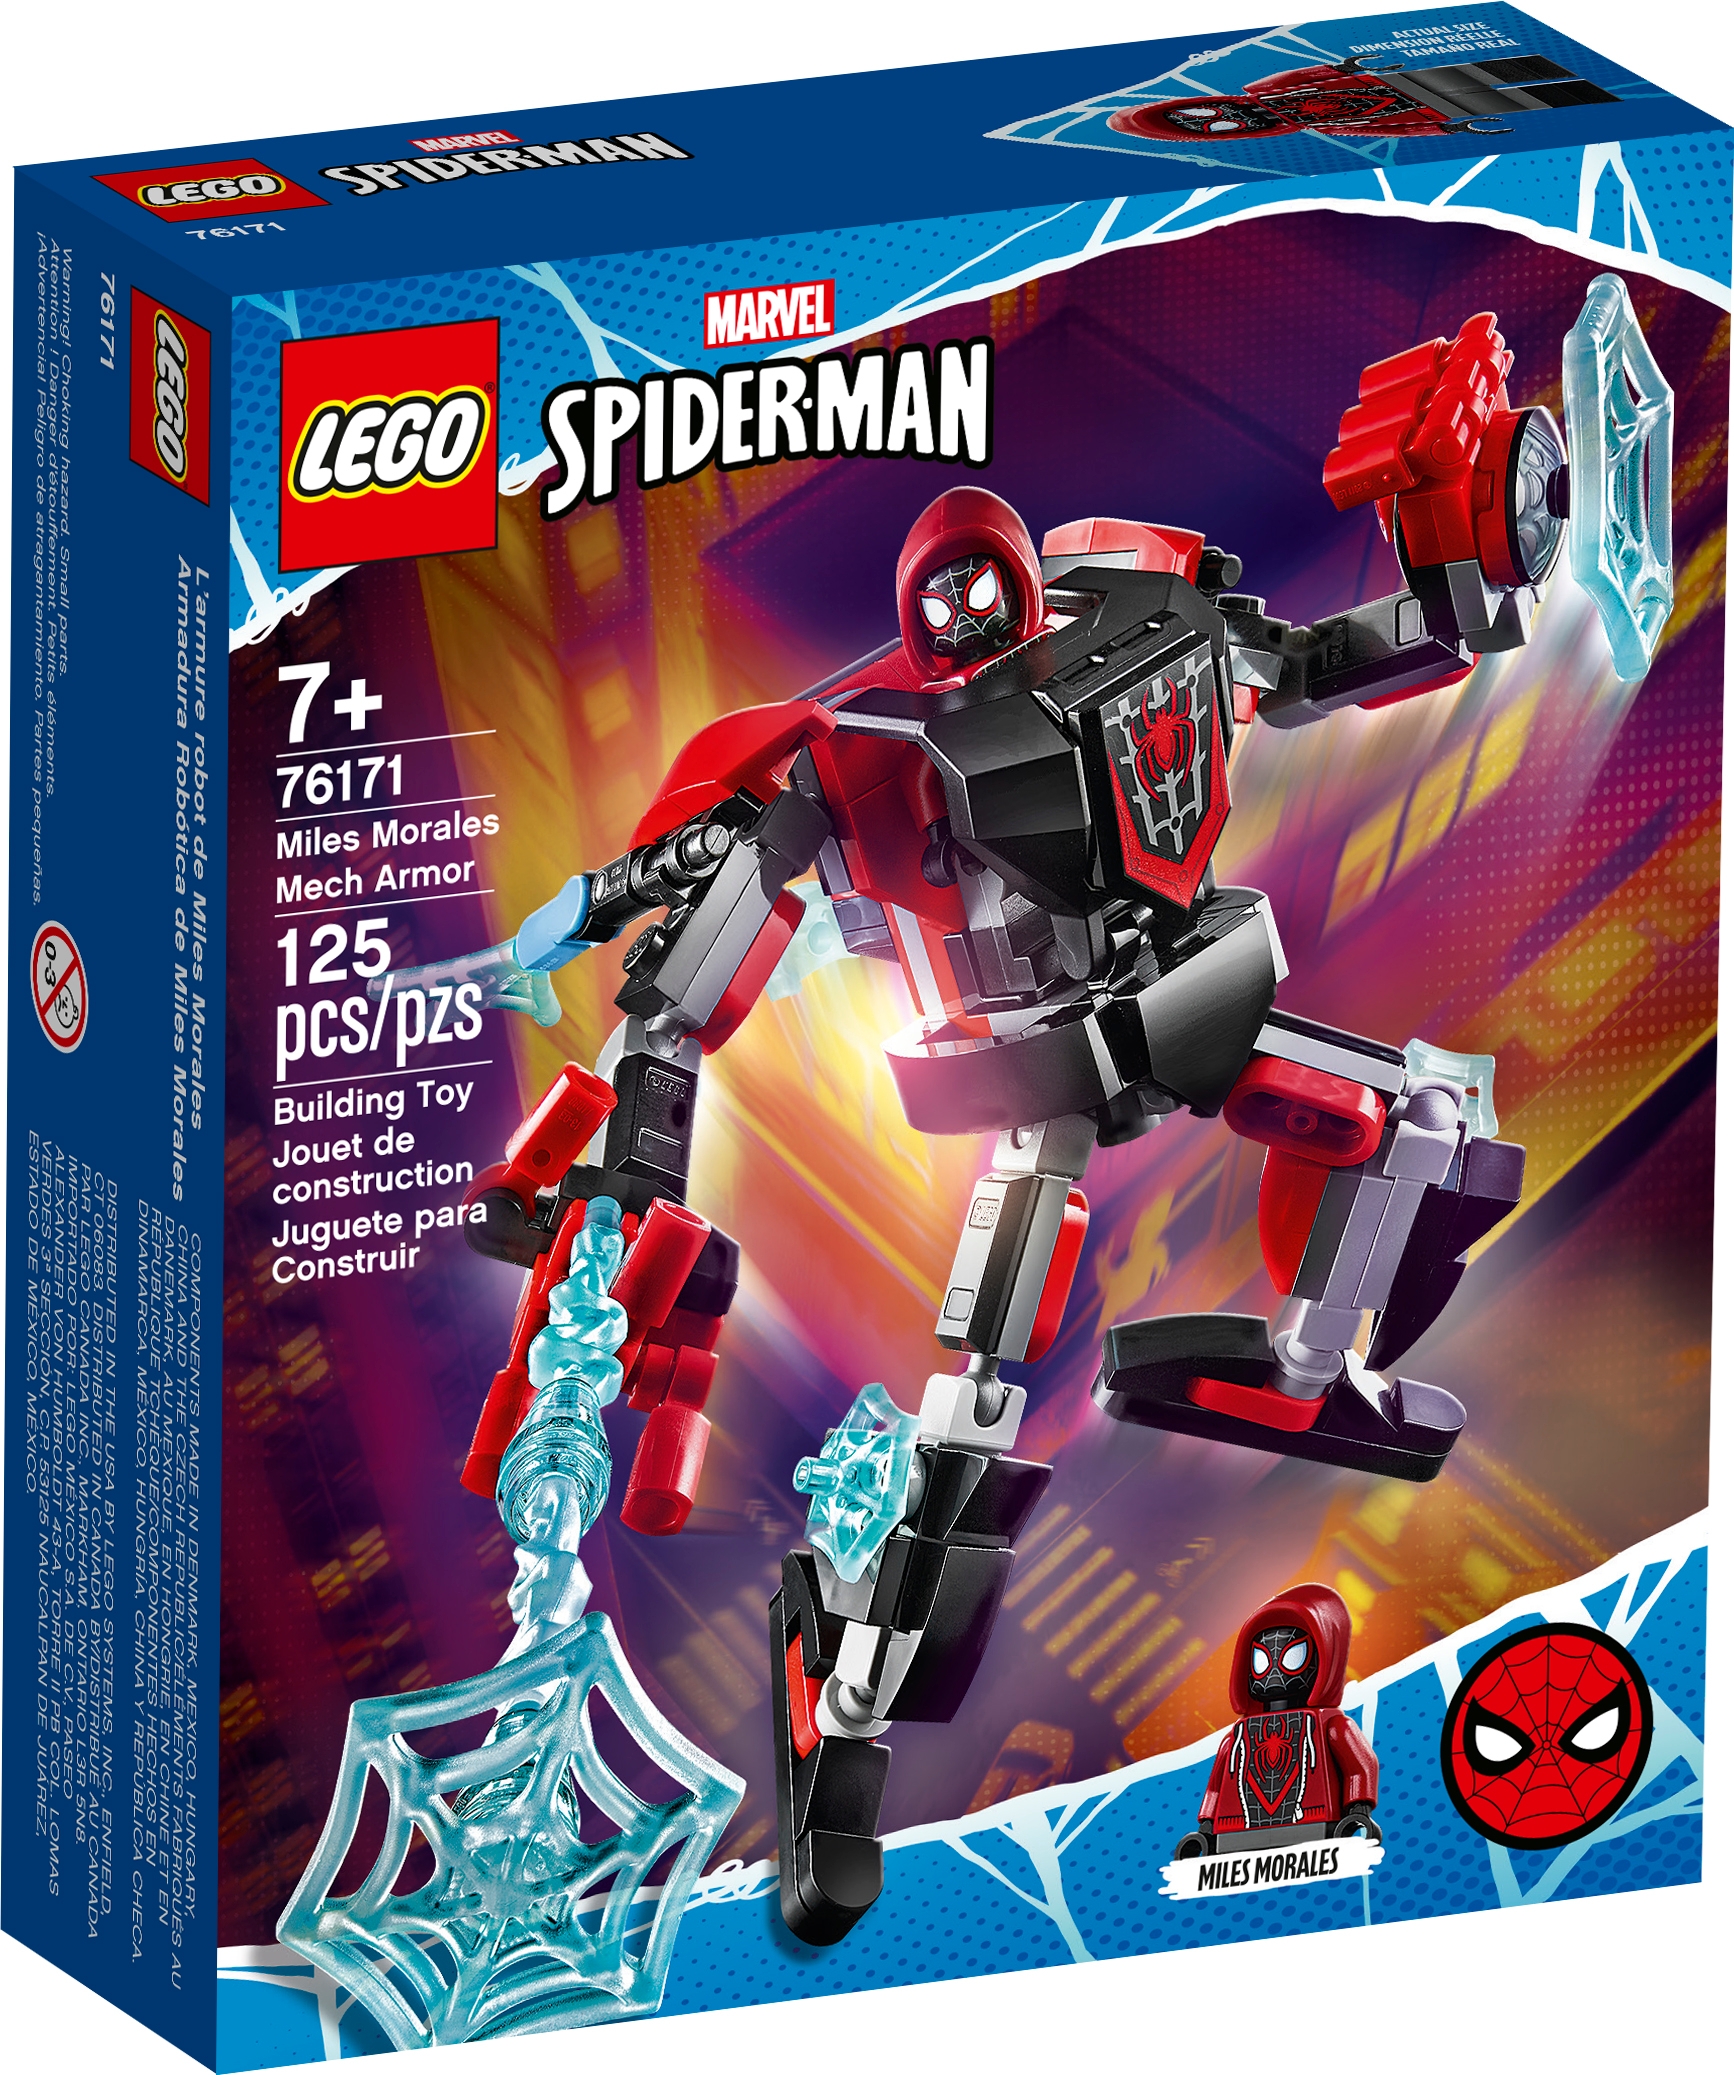 Miles Morales Mech Armor 76171 | Spider-Man | Buy online at the LEGO® Shop US